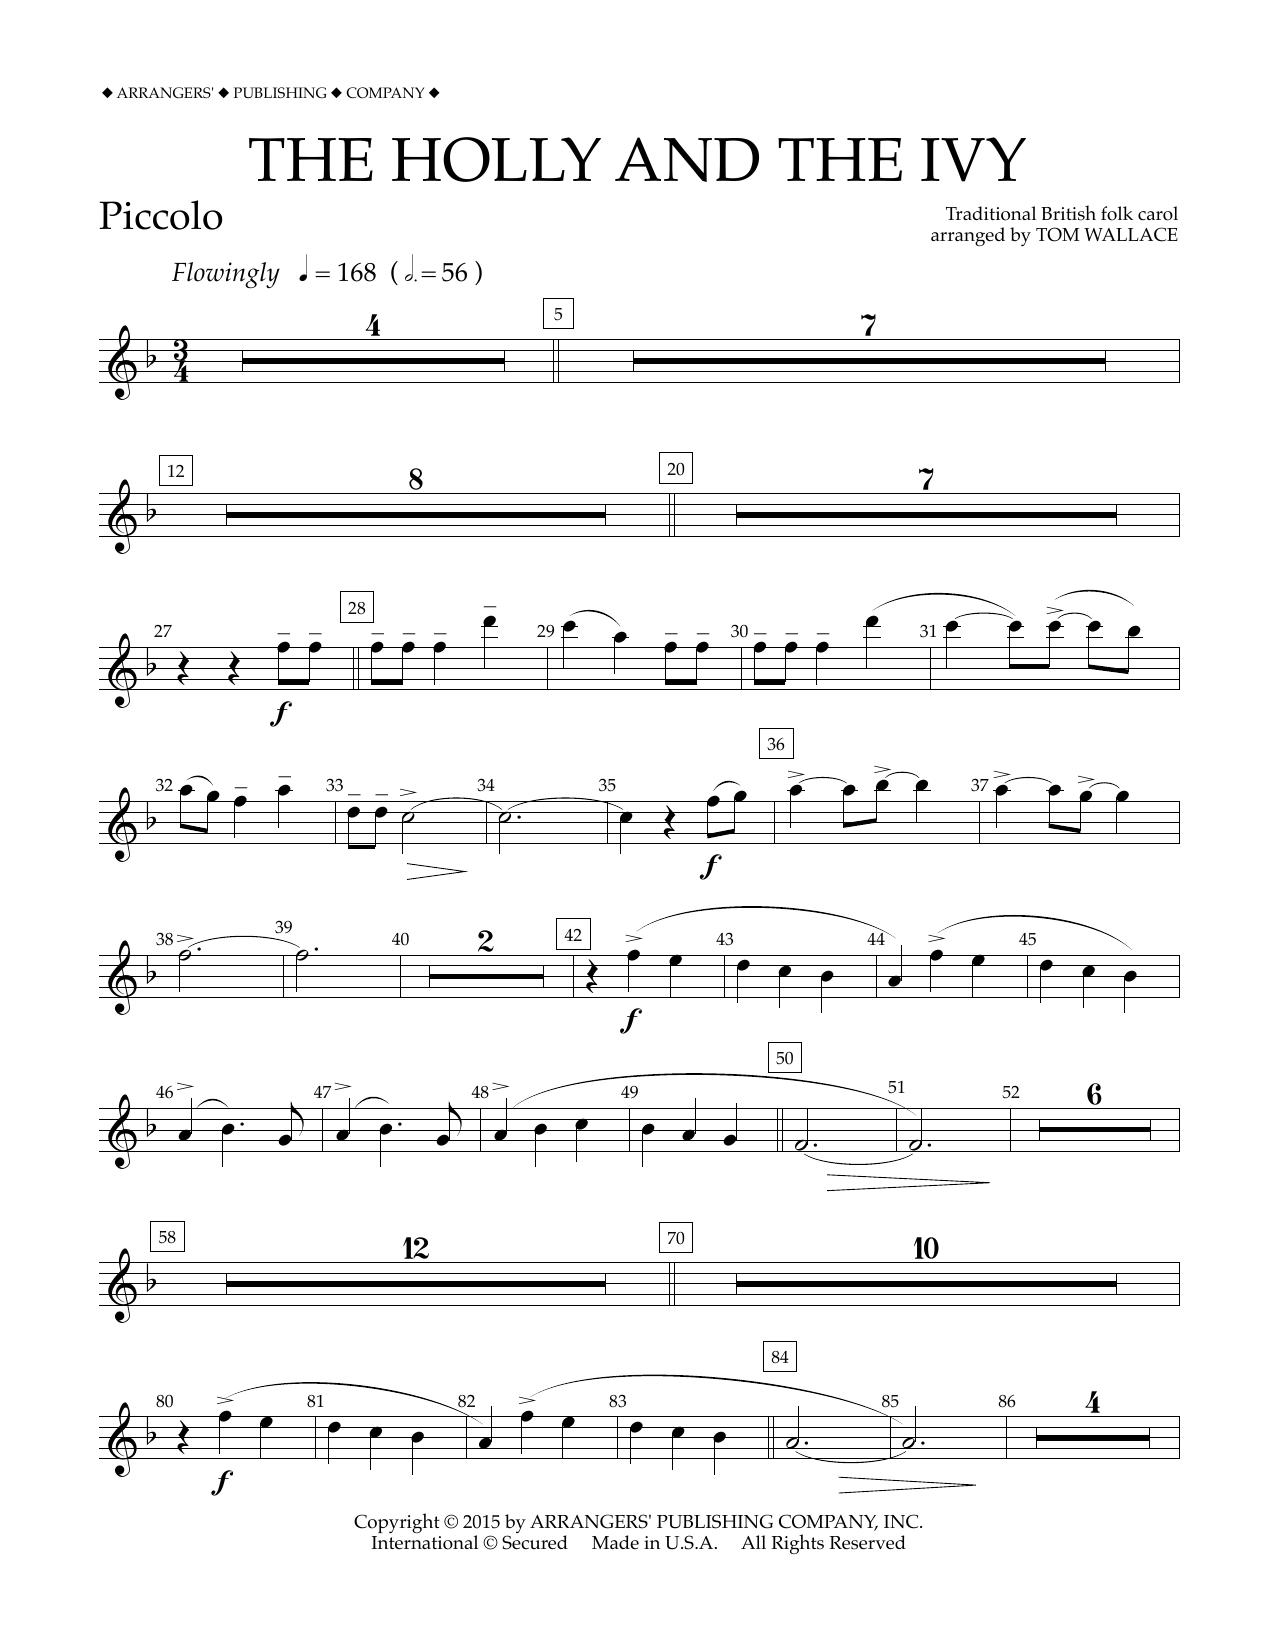 Download Tom Wallace The Holly and the Ivy - Piccolo Sheet Music